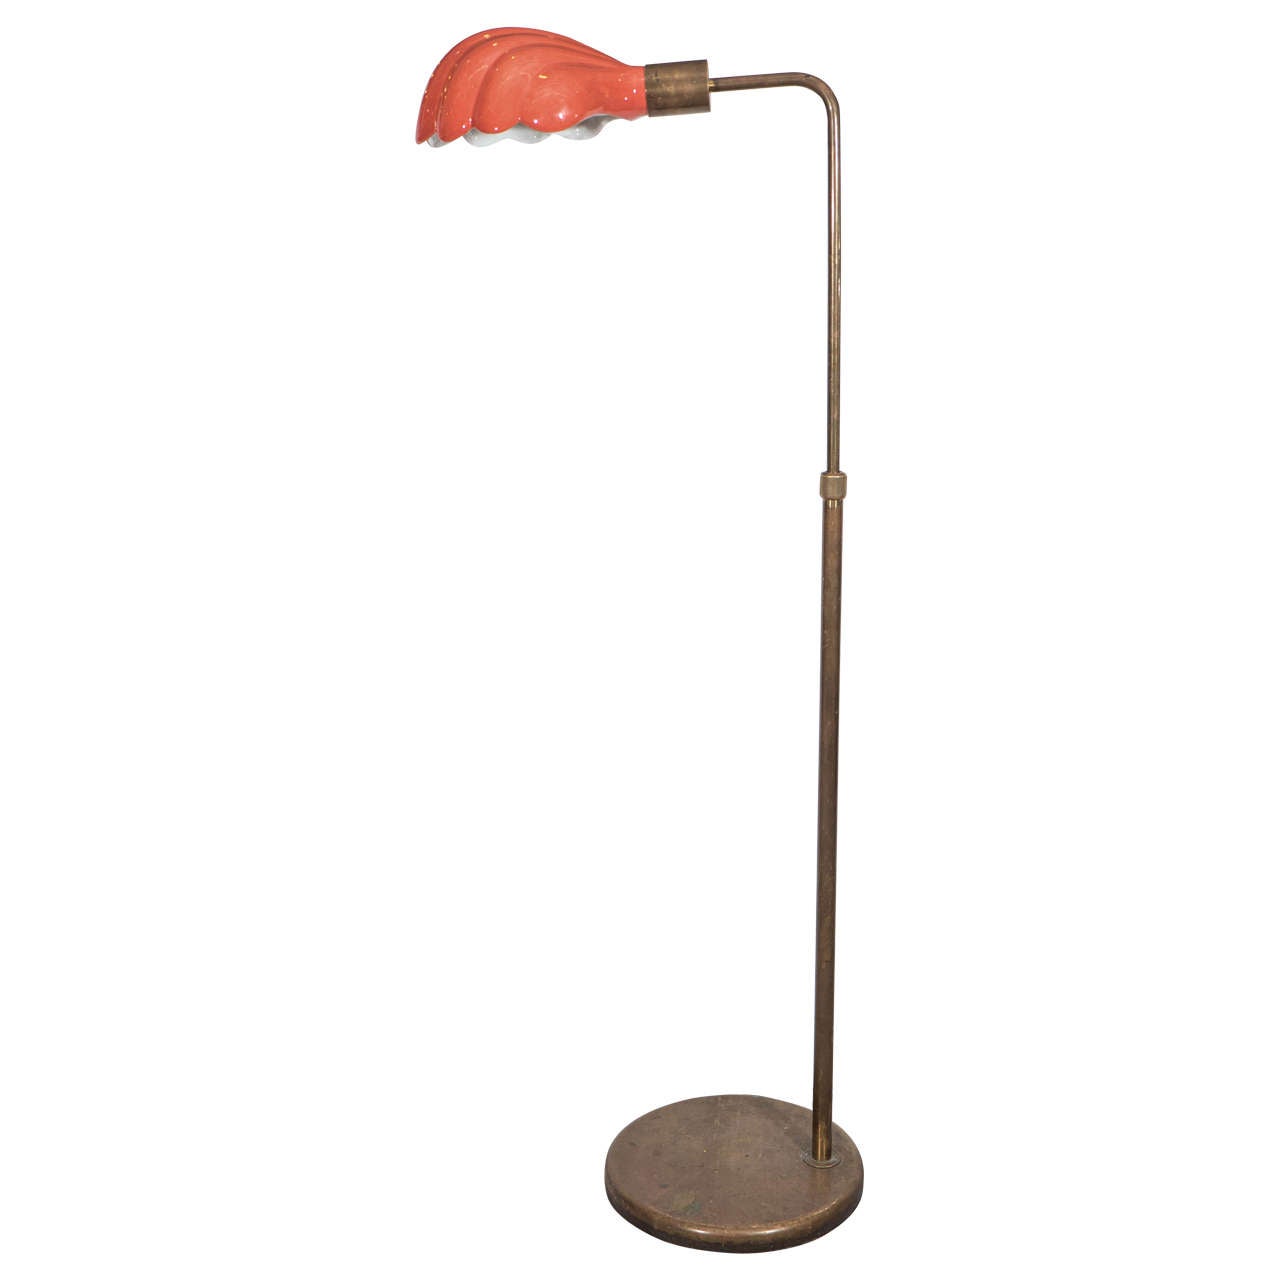 Midcentury Italian Floor Lamp with Scallop Shell Form Shade